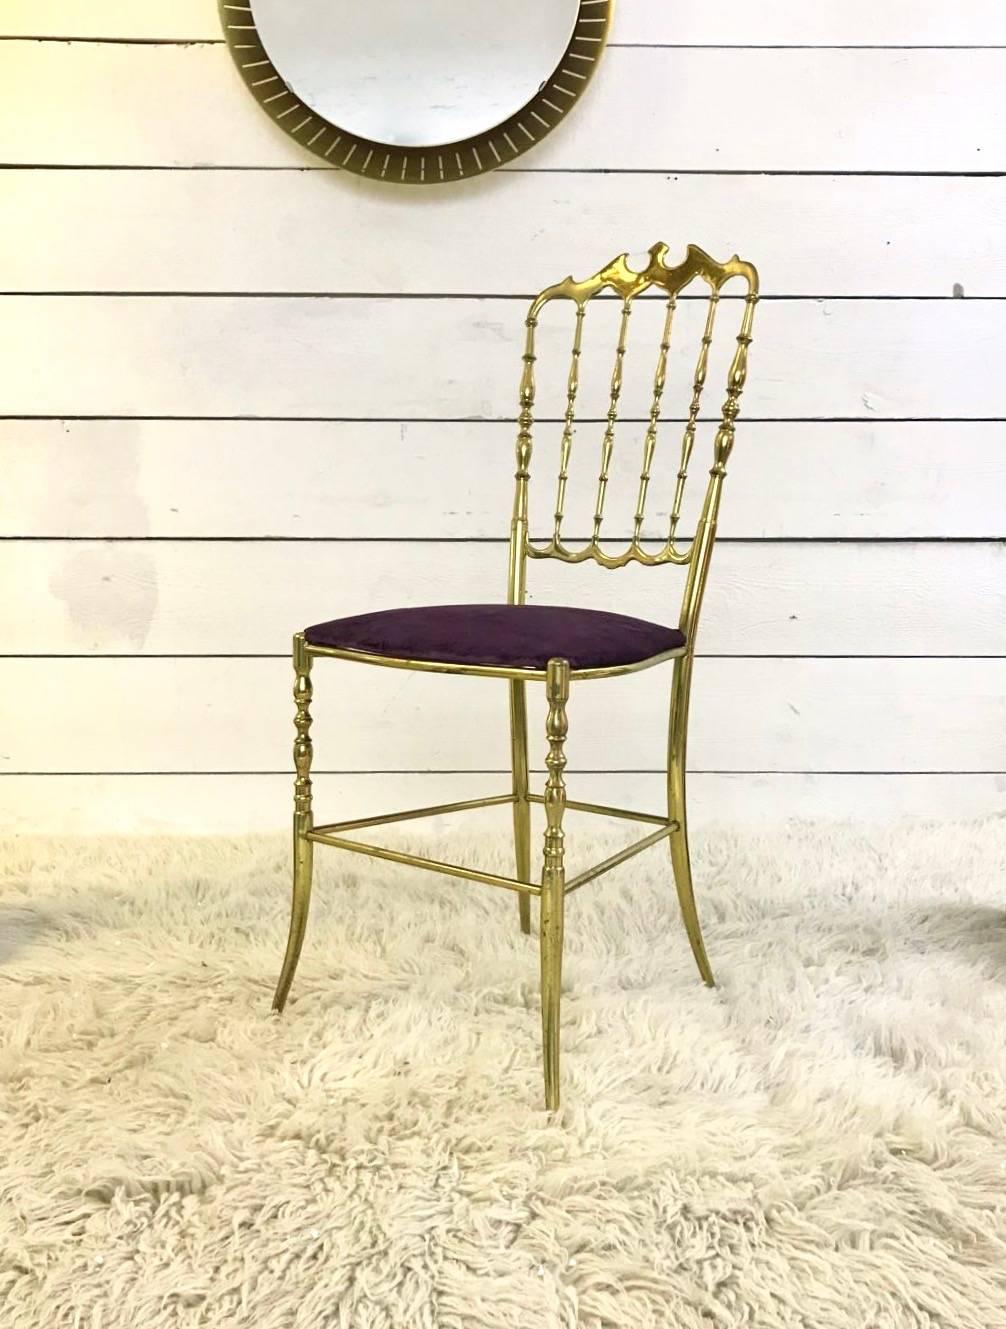 Vintage gilt brass set of Chiavari chairs with purple velvet upholstery, circa 1950.
Originally designed by Giuseppe Gaetano Descalzi and produced since the early 19th century in the town of Chiavari, Italy.
 